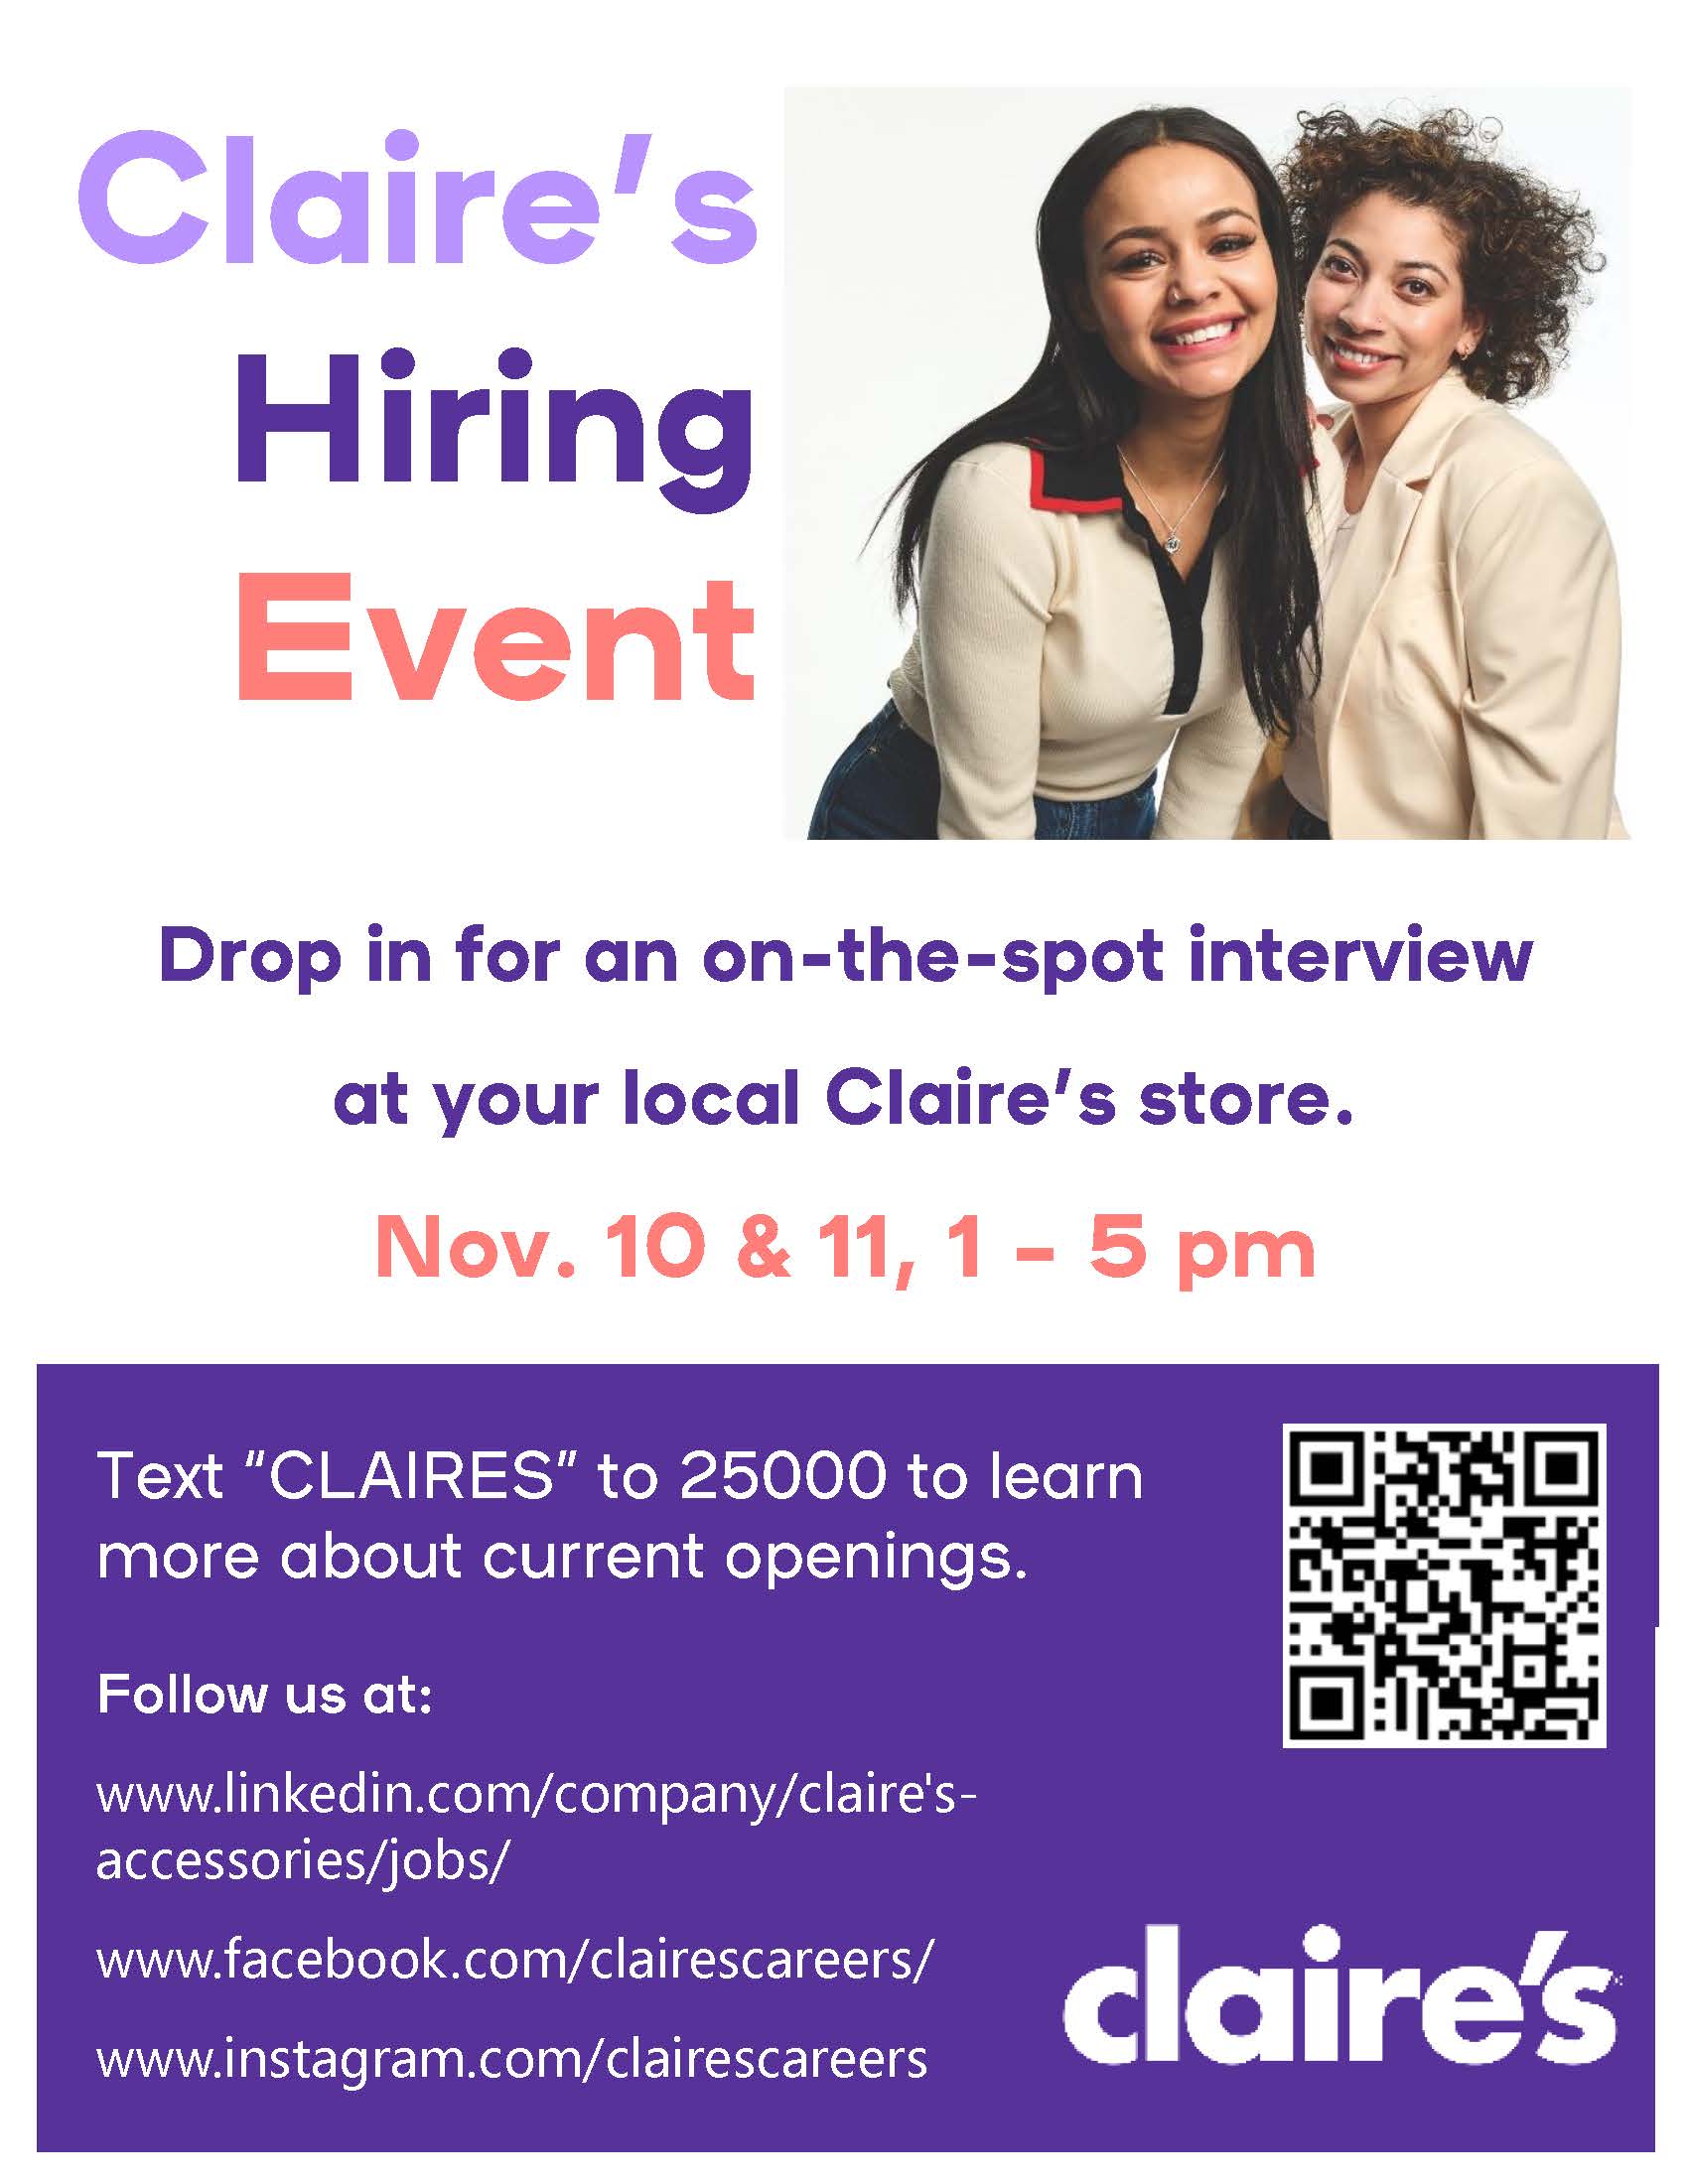 Hiring Event Poster 11 10 22 Claires